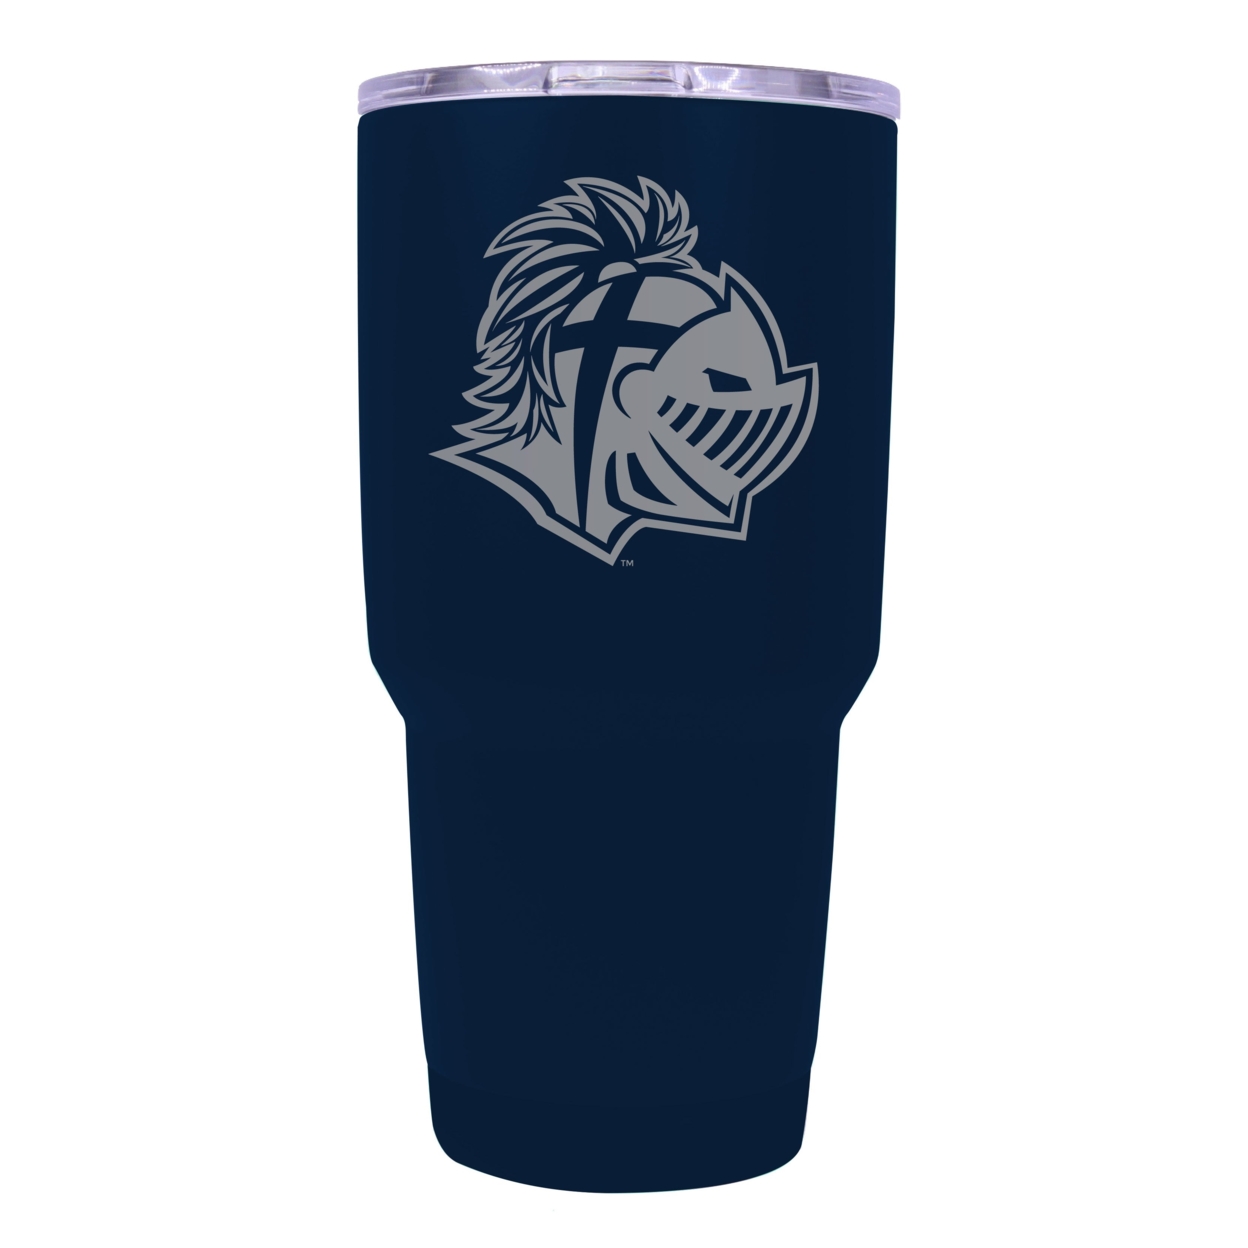 Southern Wesleyan University 24 Oz Laser Engraved Stainless Steel Insulated Tumbler - Choose Your Color. - Navy